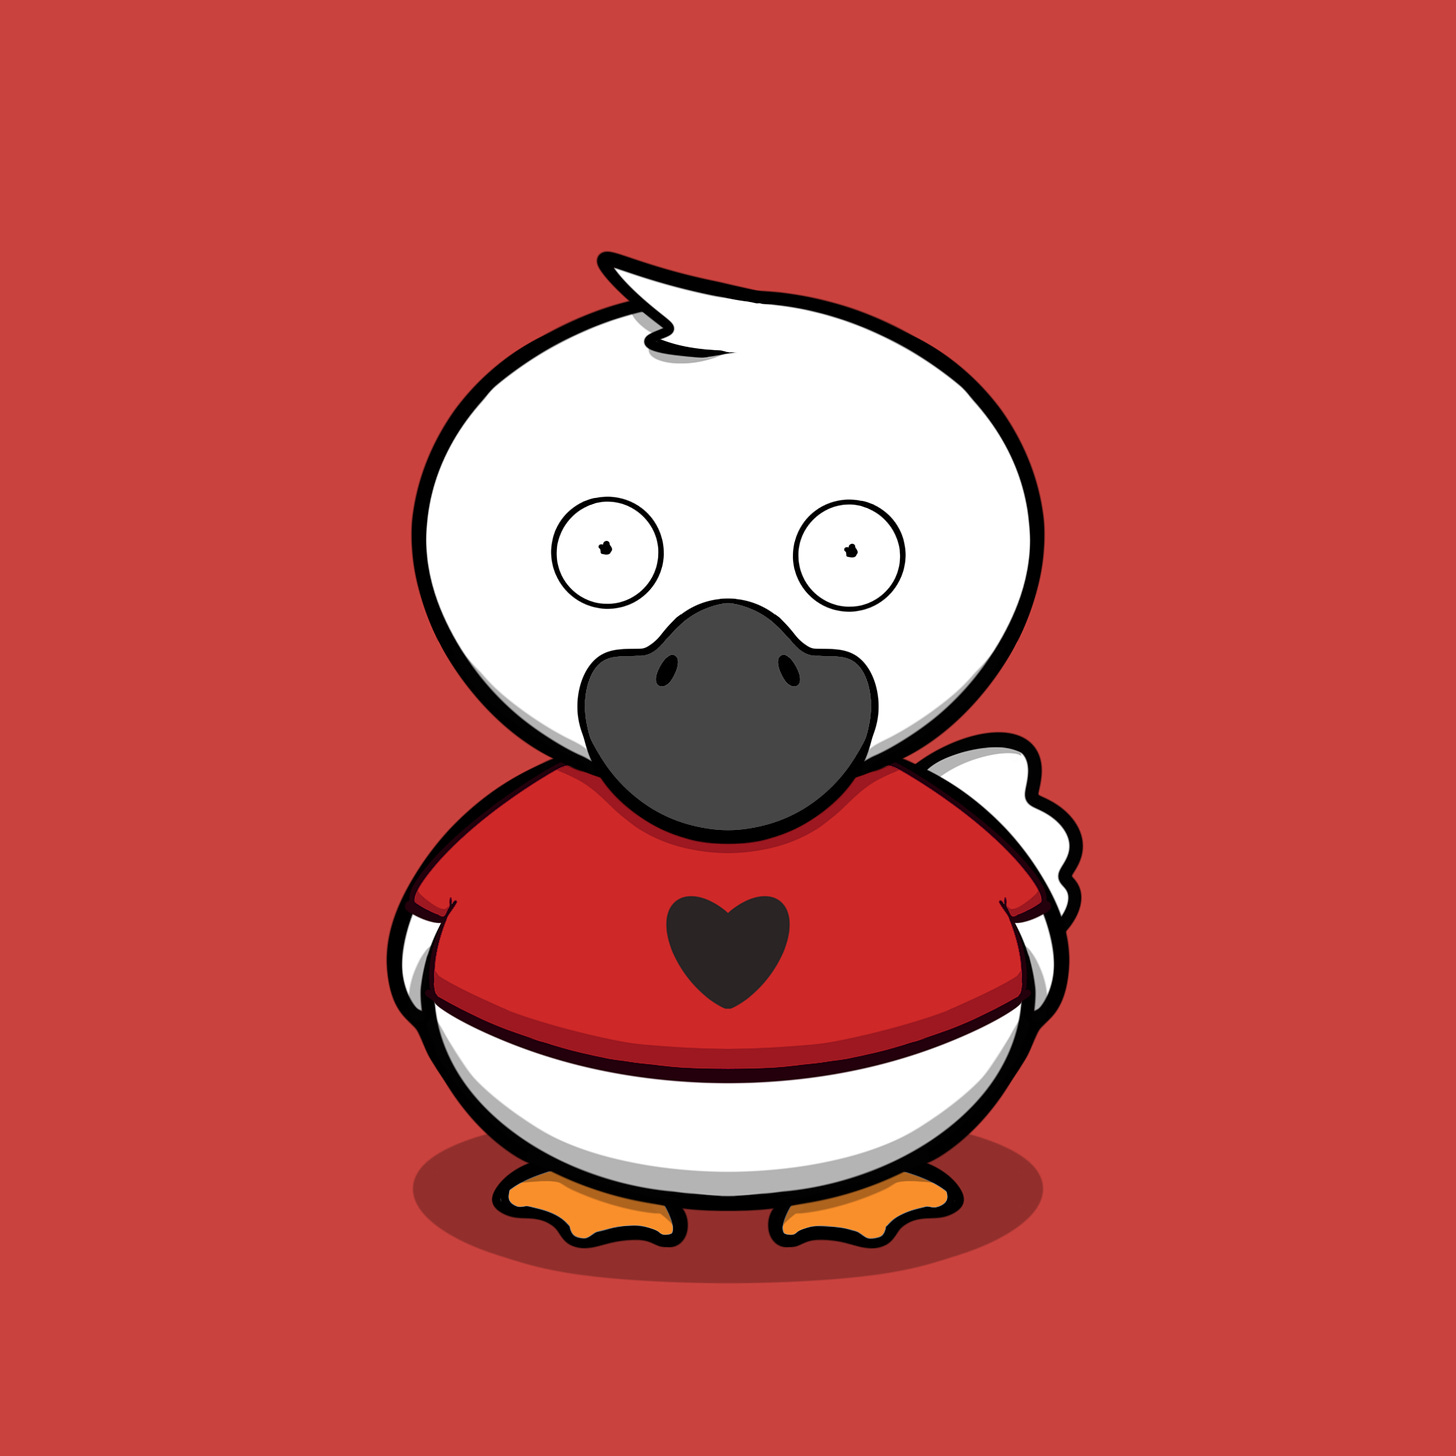 A surprised duck on a red background with a heart shirt.